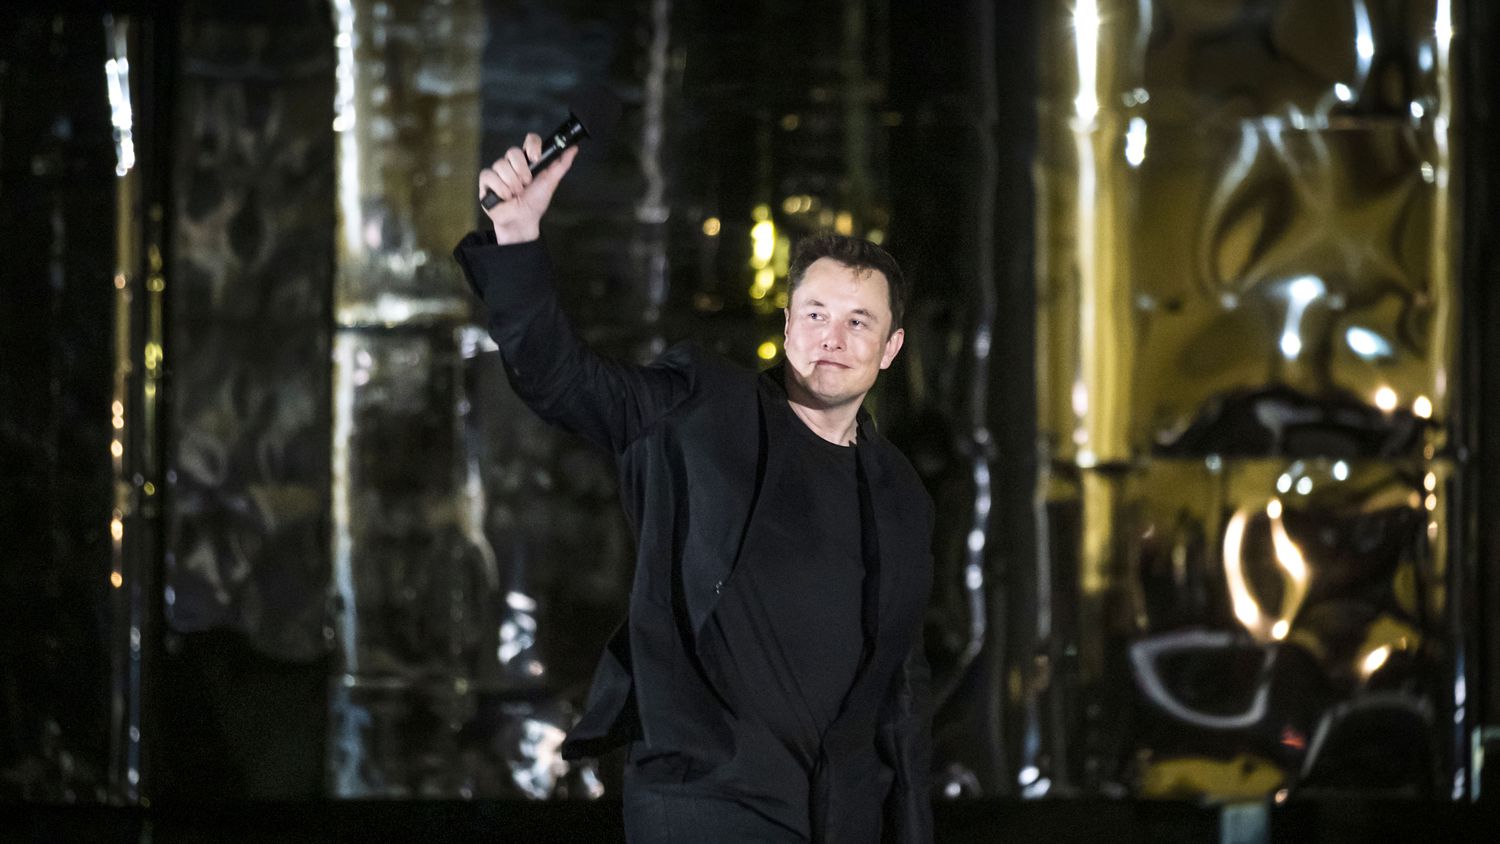 SpaceX founder Elon Musk makes a presentation in front of a prototype of the Starship spacecraft at the SpaceX Space Launch Facility in Boca Chica, Texas, on Saturday, Sept. 28, 2019.